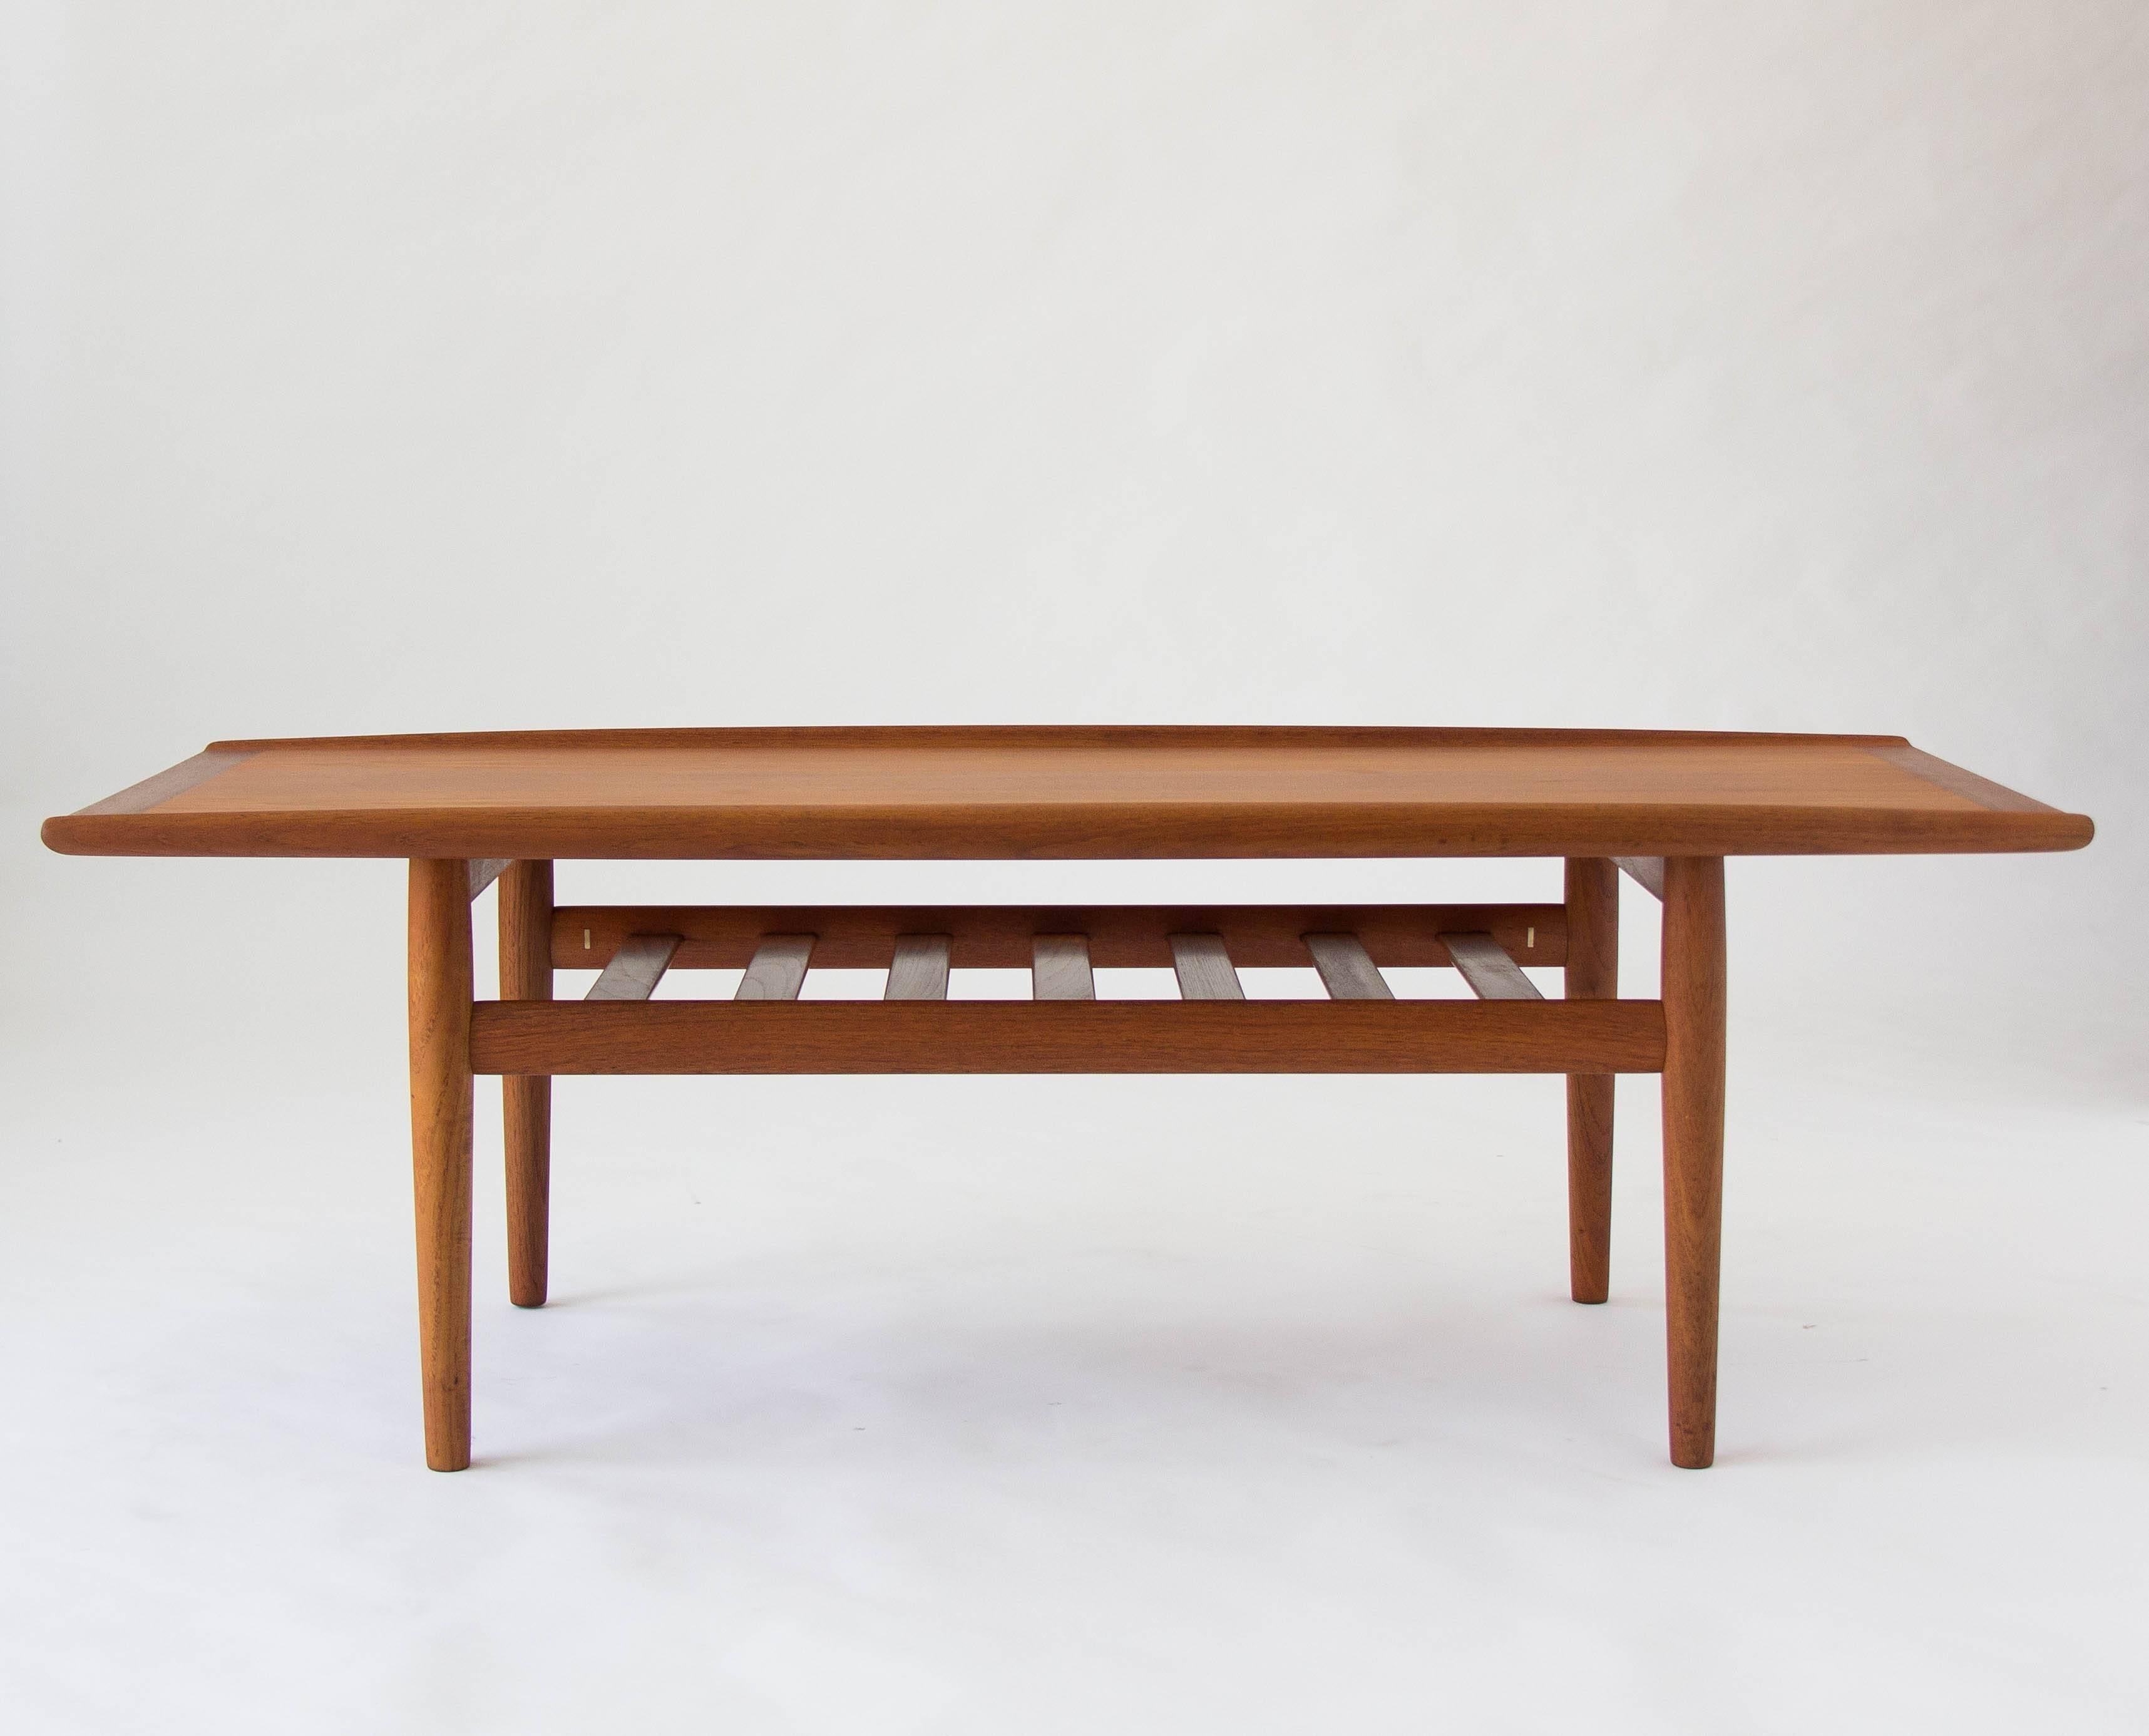 20th Century Grete Jalk Coffee Table with Slatted Shelf